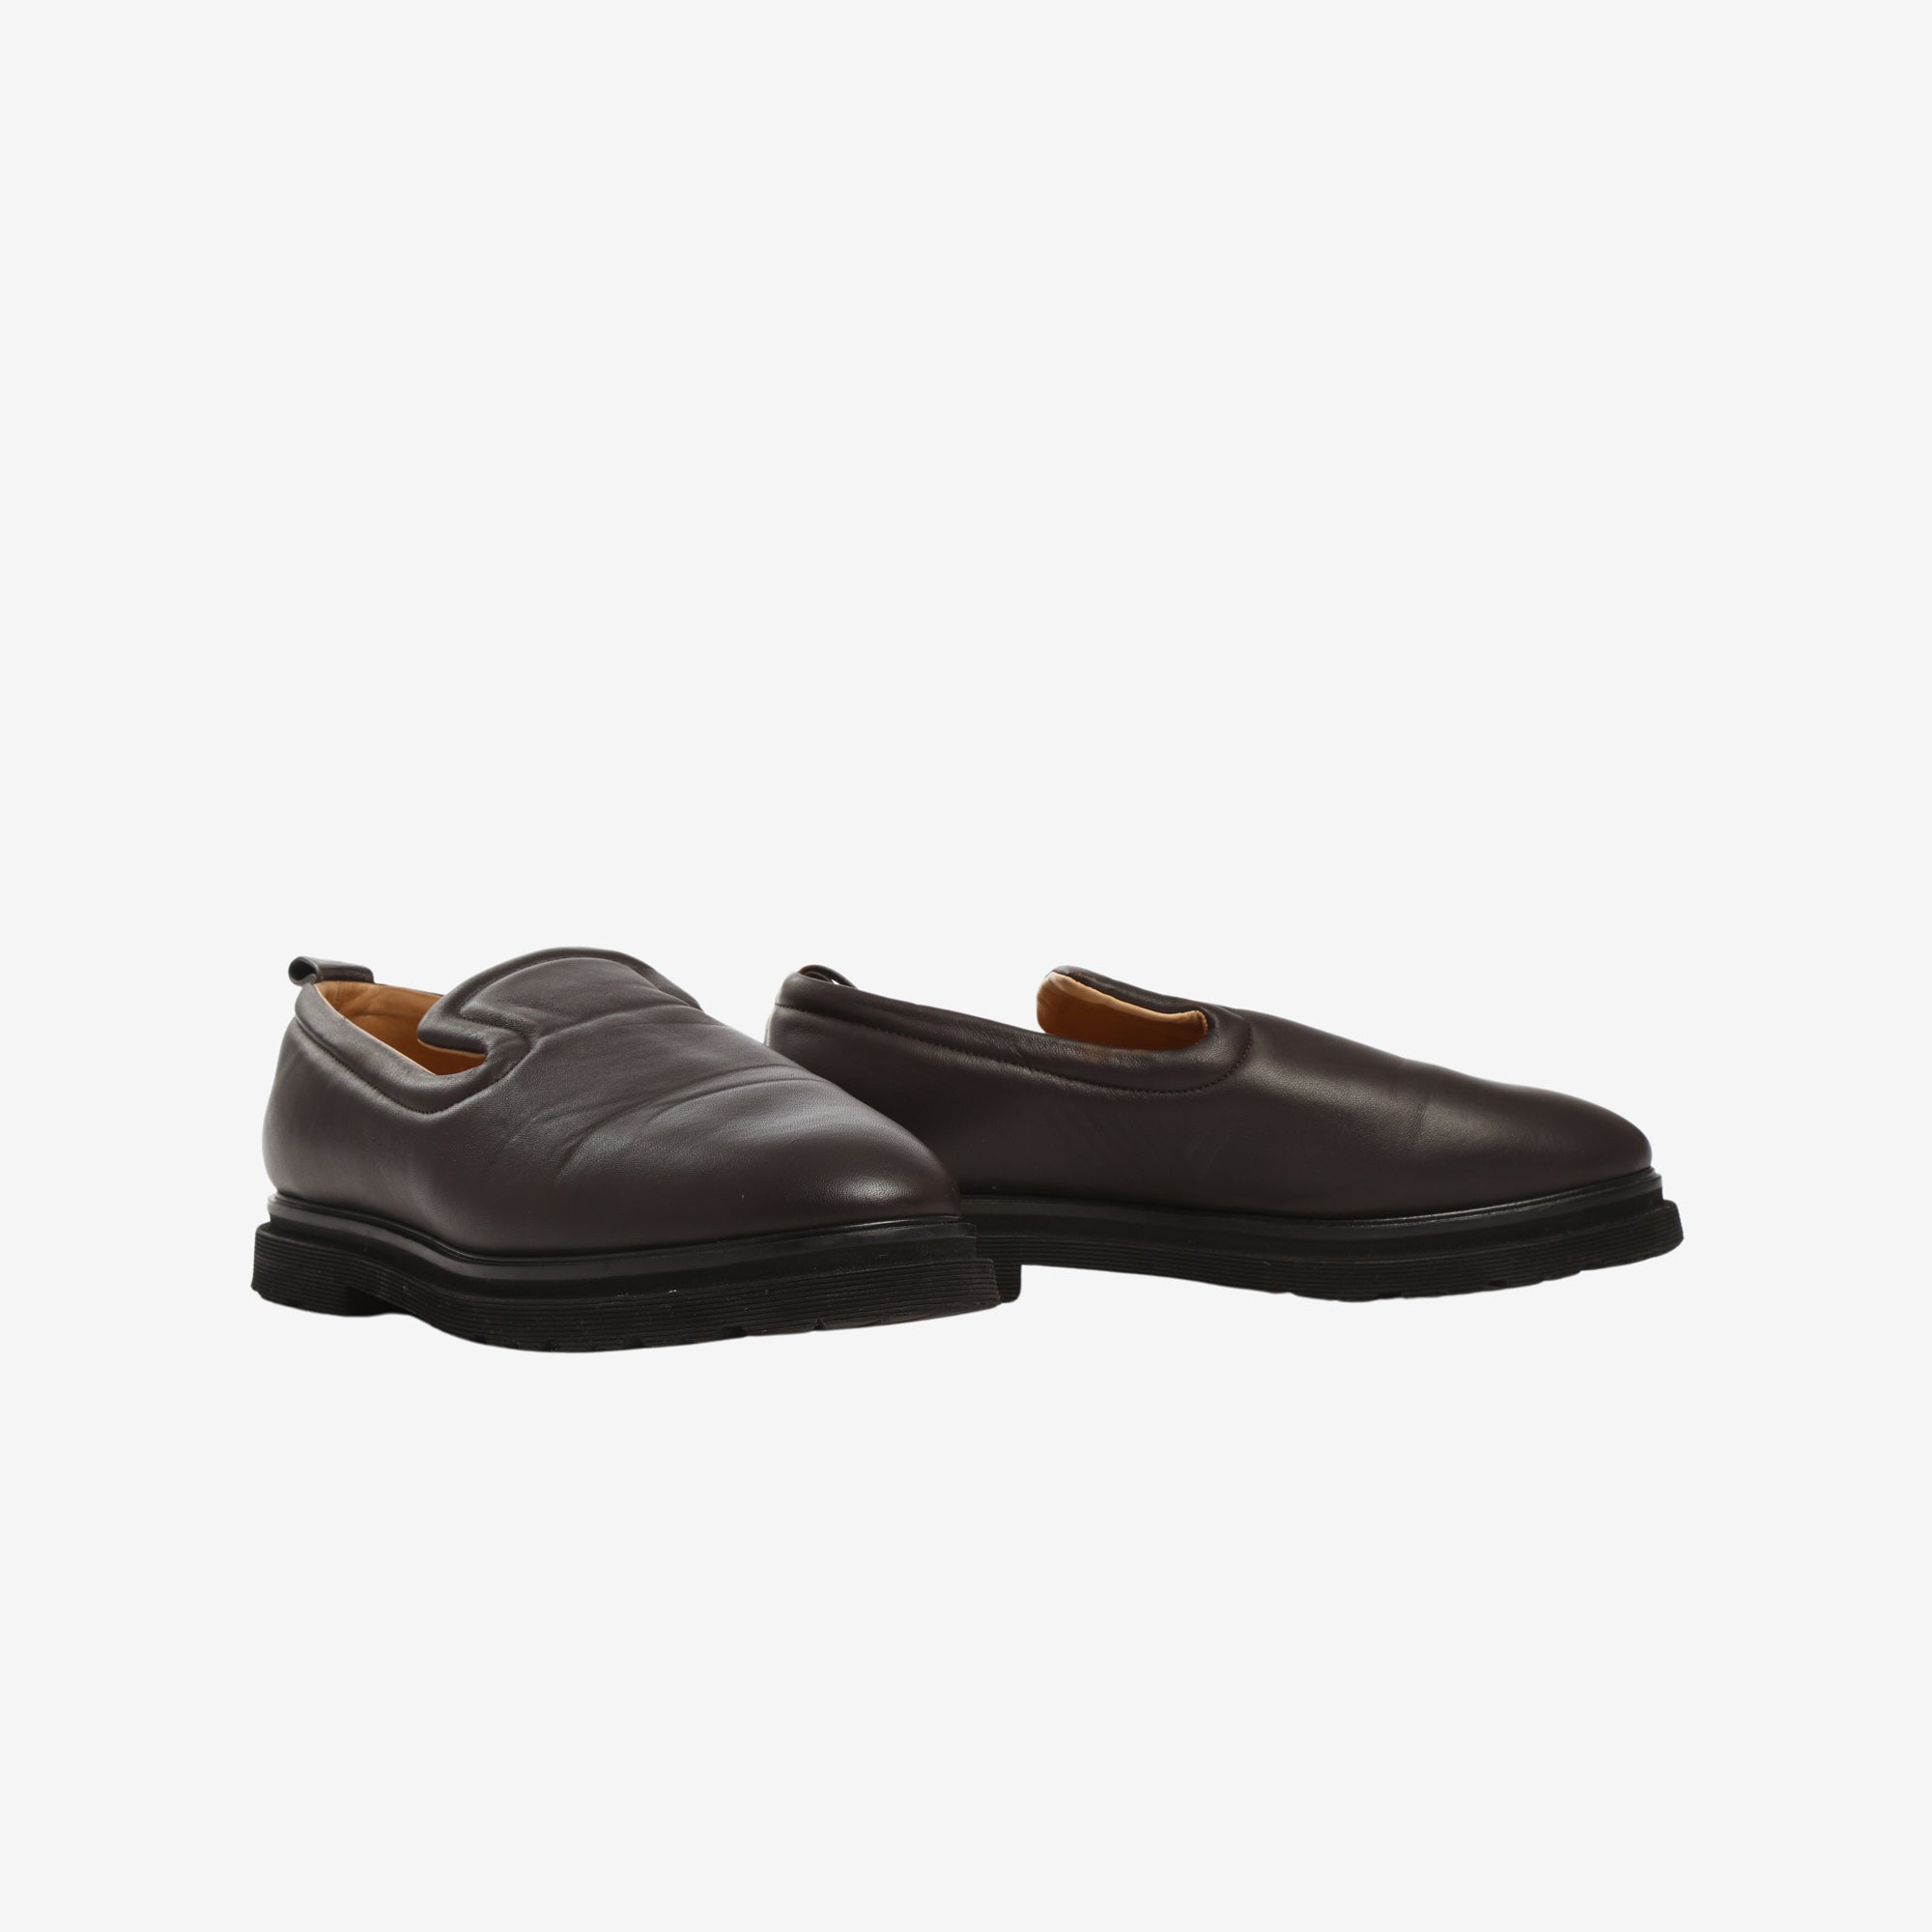 Padded Leather Loafers